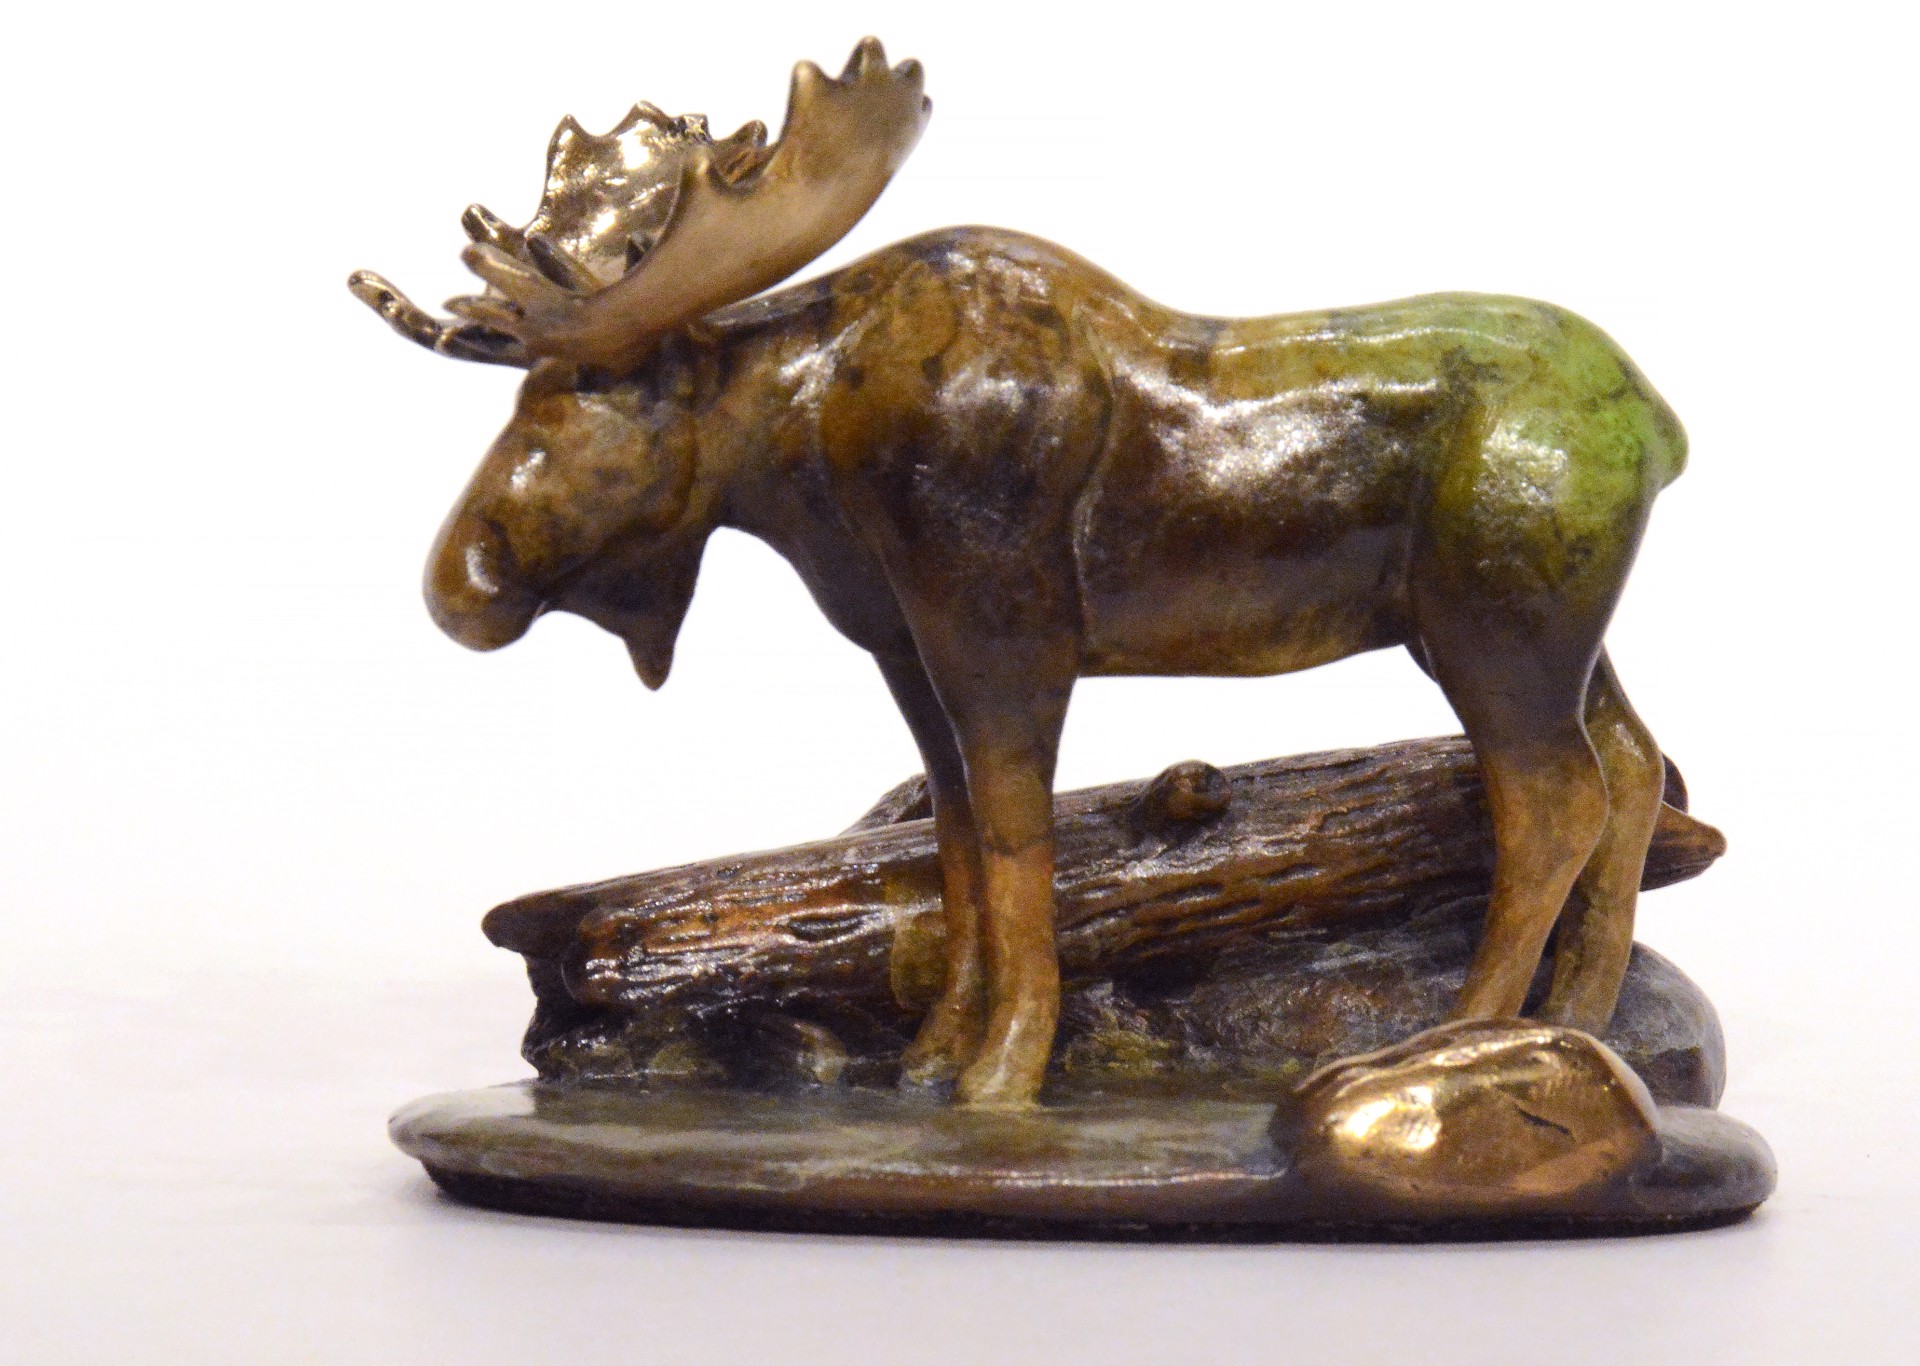 Lumber (Moose) by Eric Wilcox